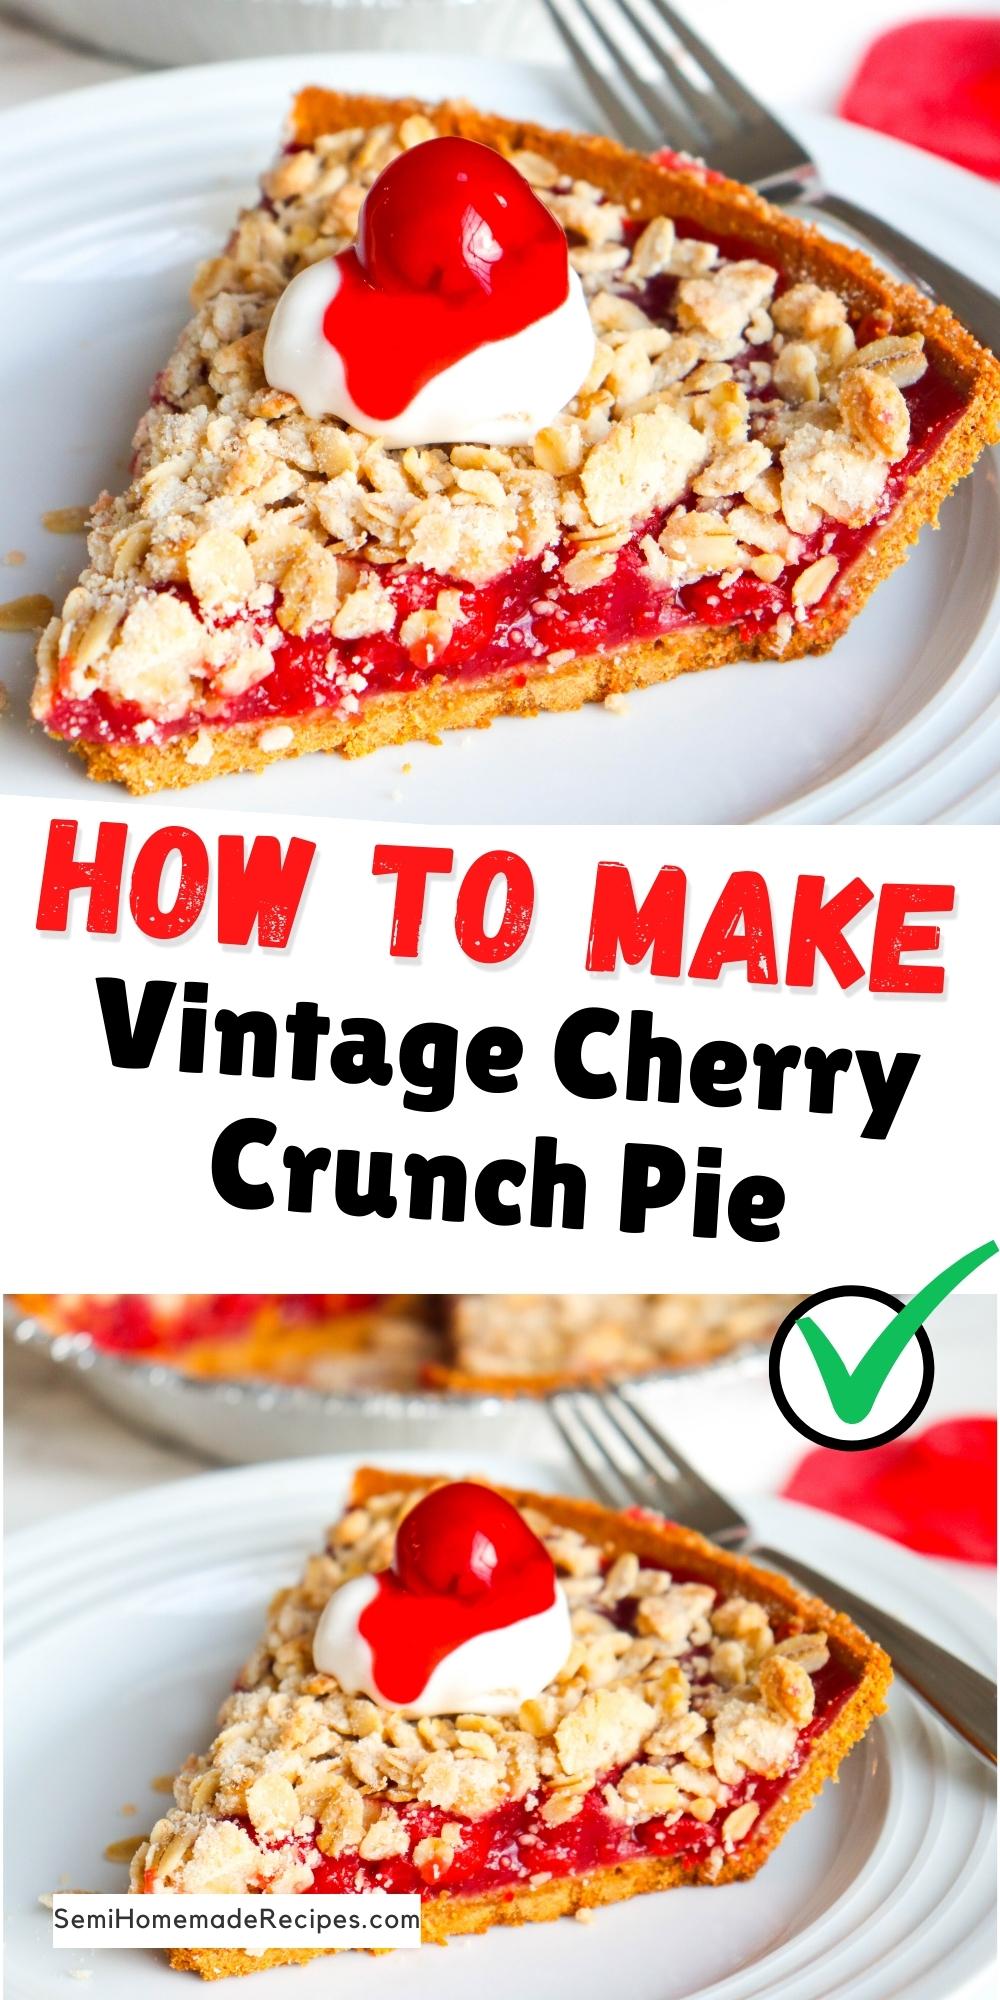 Vintage Cherry Crunch Pie is the perfect cherry pie to make for any party and it's great for dessert after dinner. You'll love how quickly this recipes comes together! The hardest part is waiting for it to cool! 